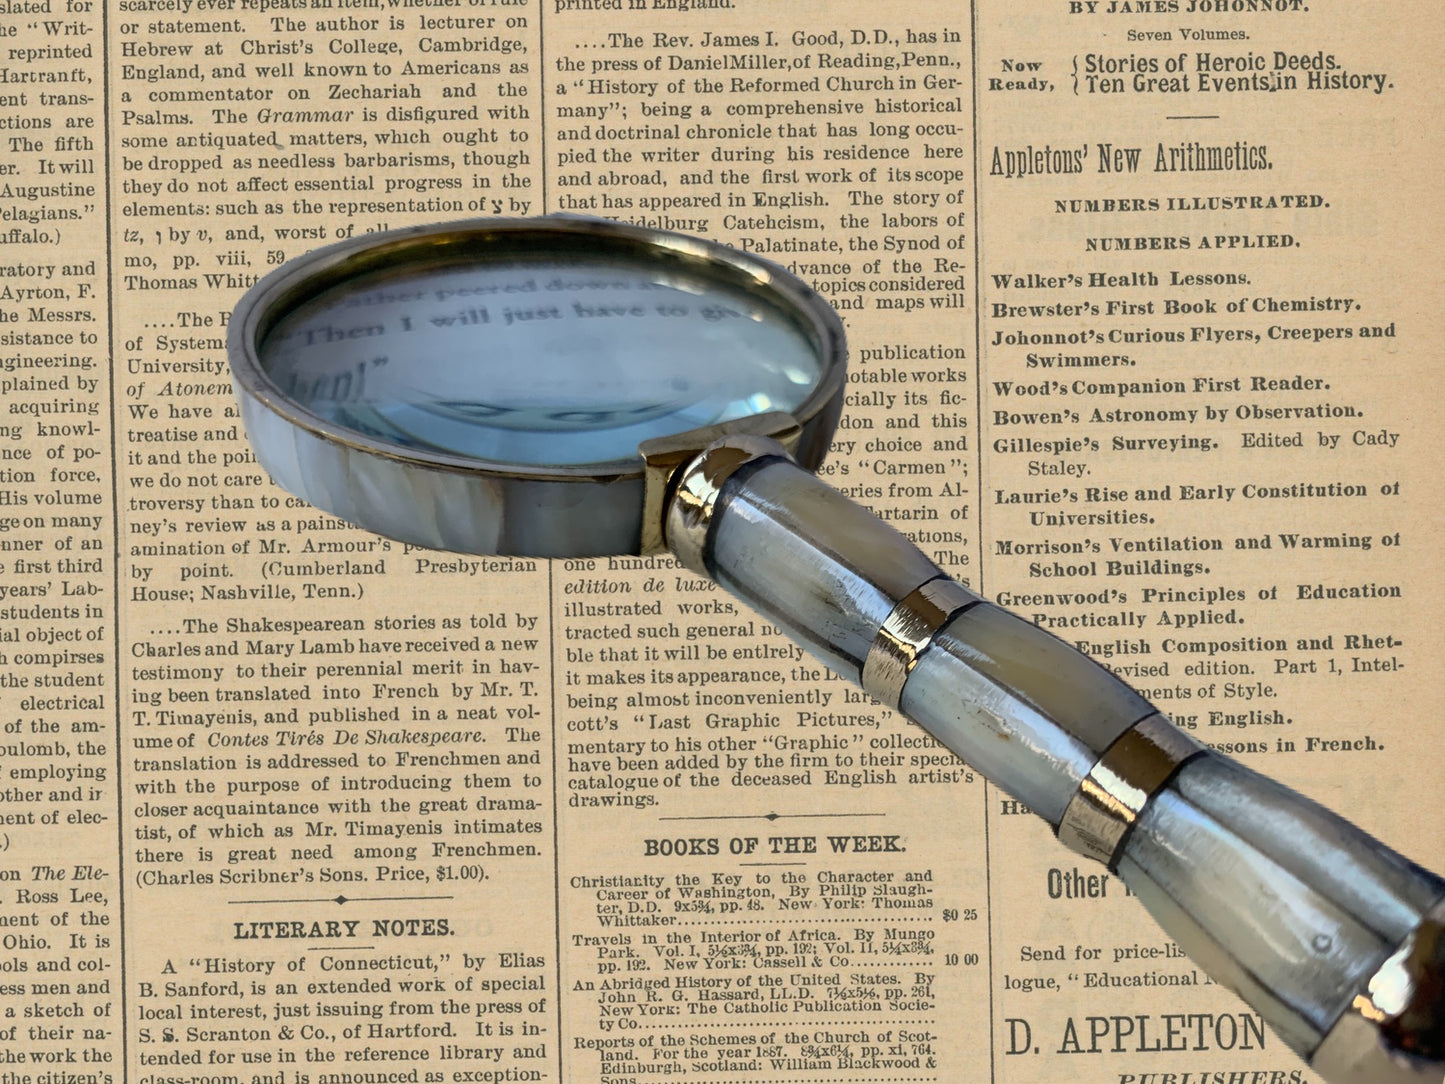 Marble magnifier